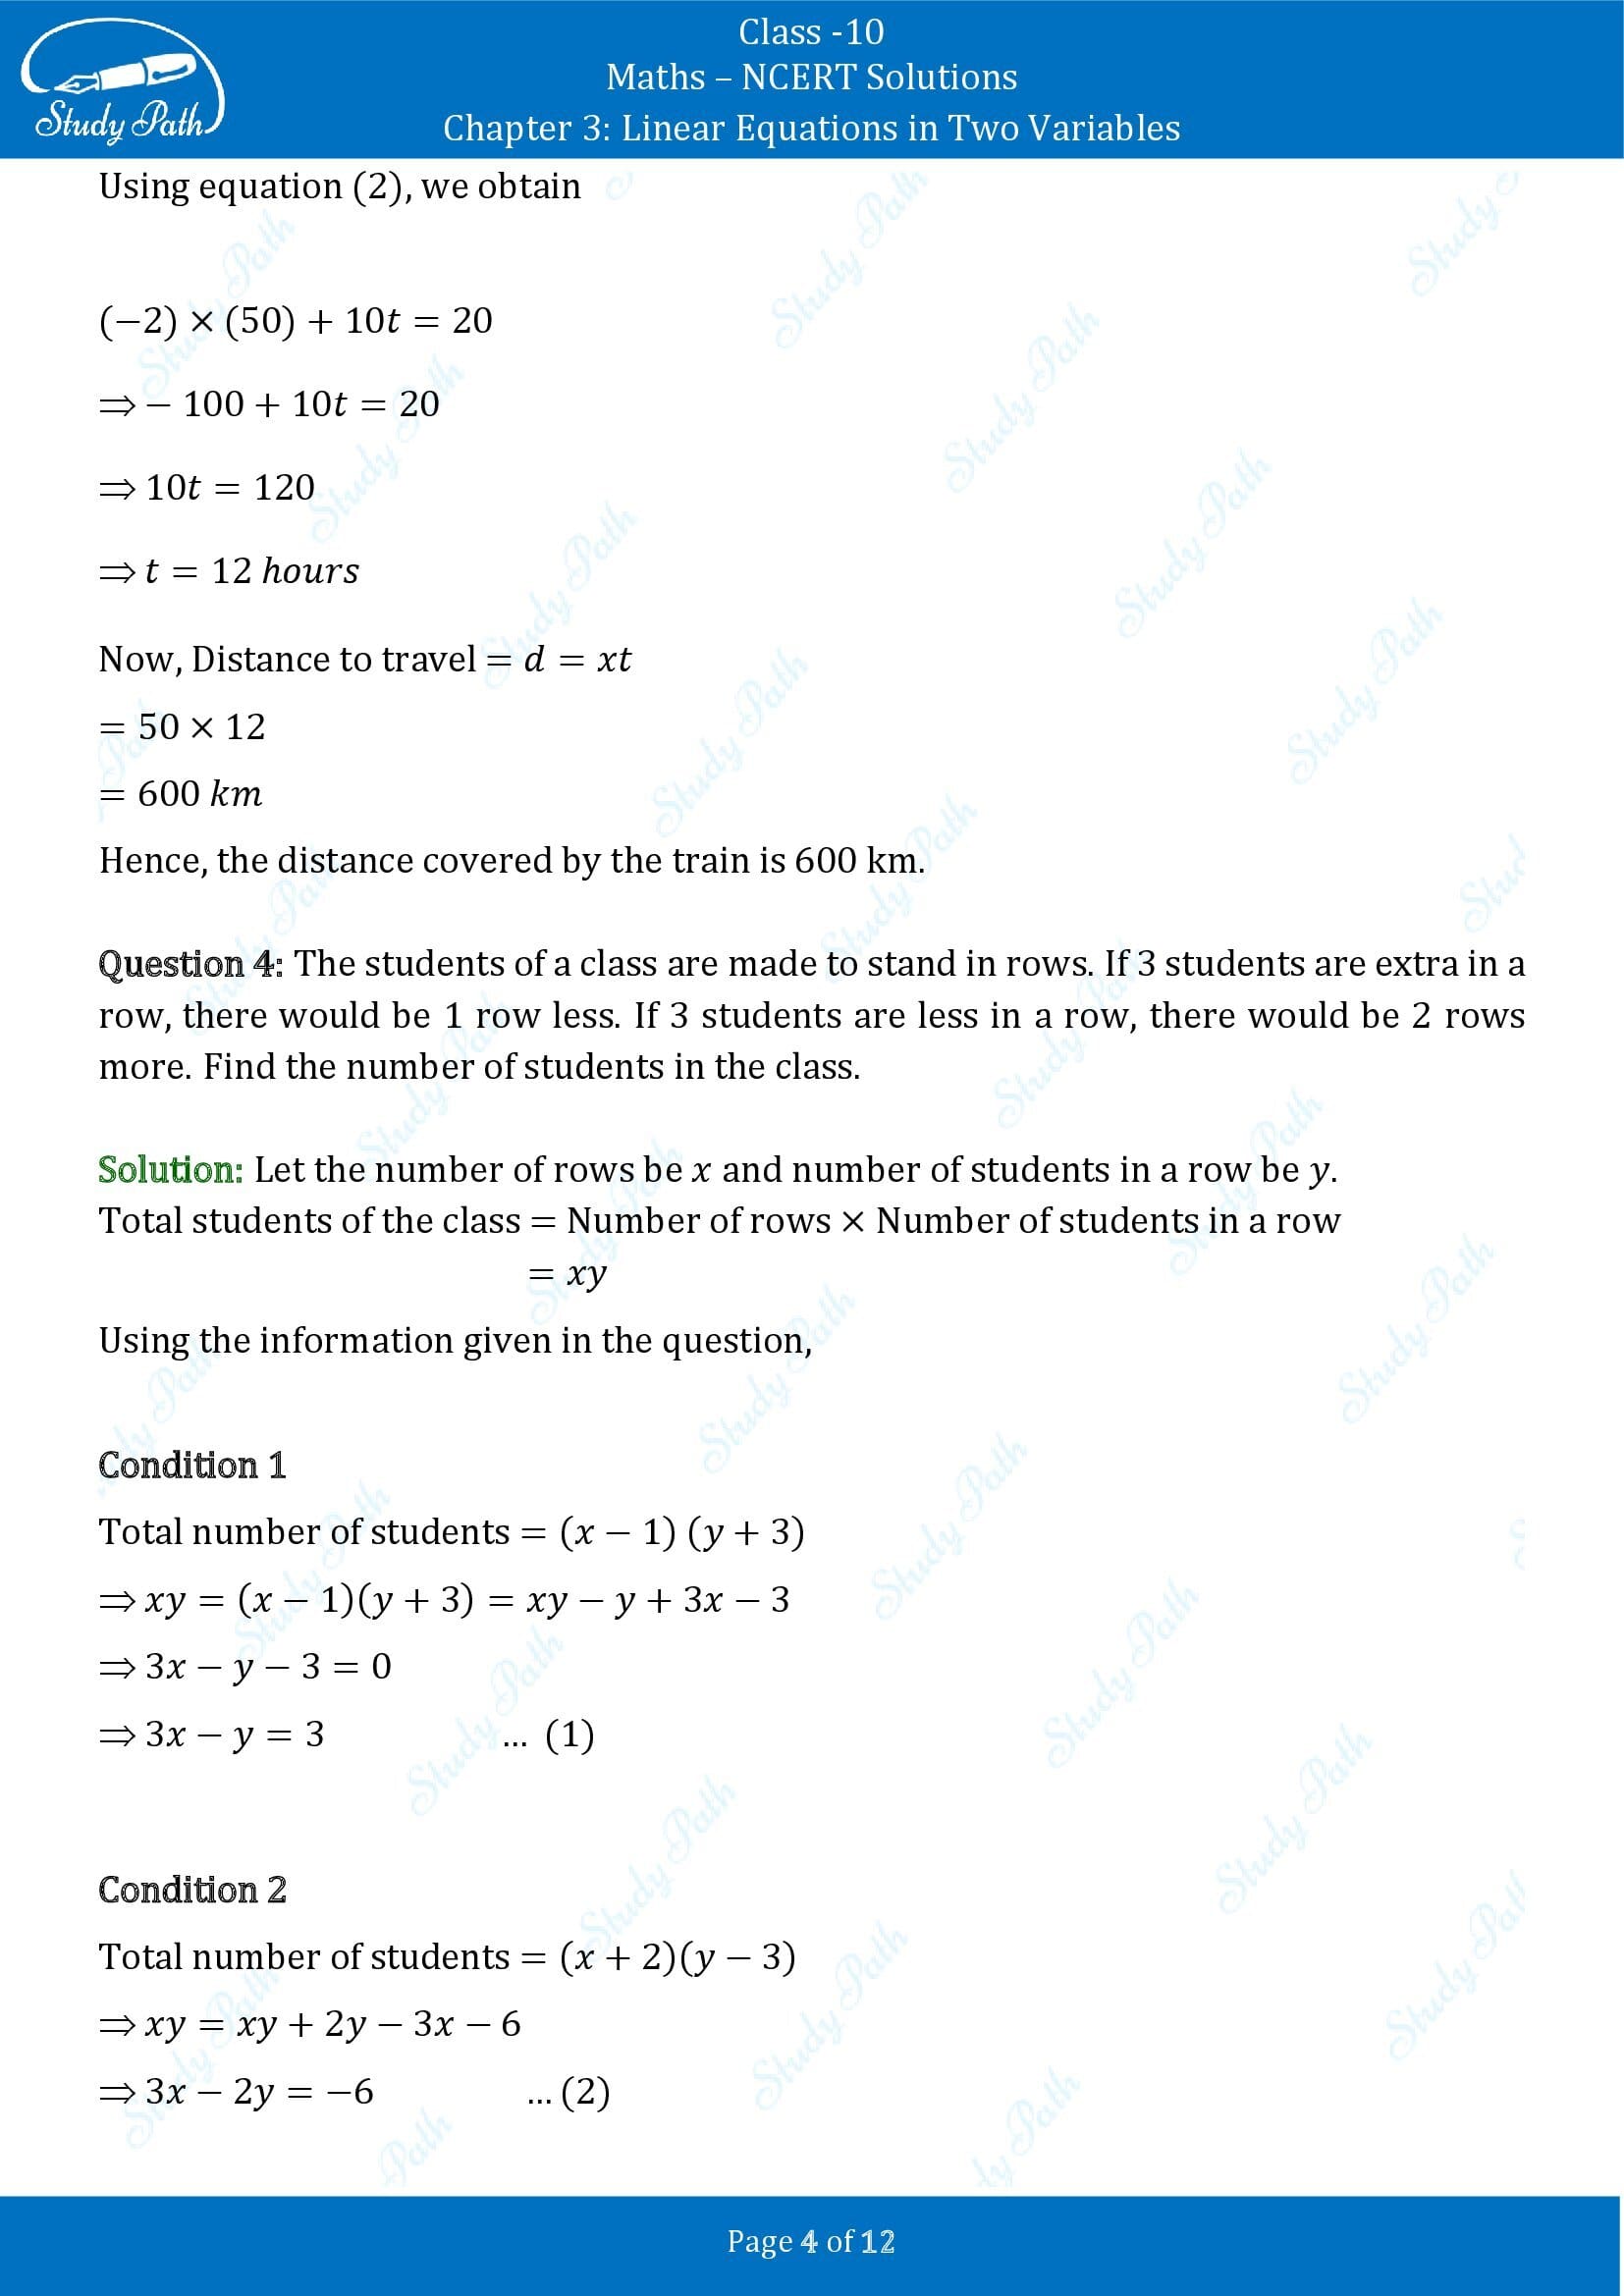 NCERT Solutions for Class 10 Maths Chapter 3 Linear Equations in Two Variables Exercise 3.7 00004